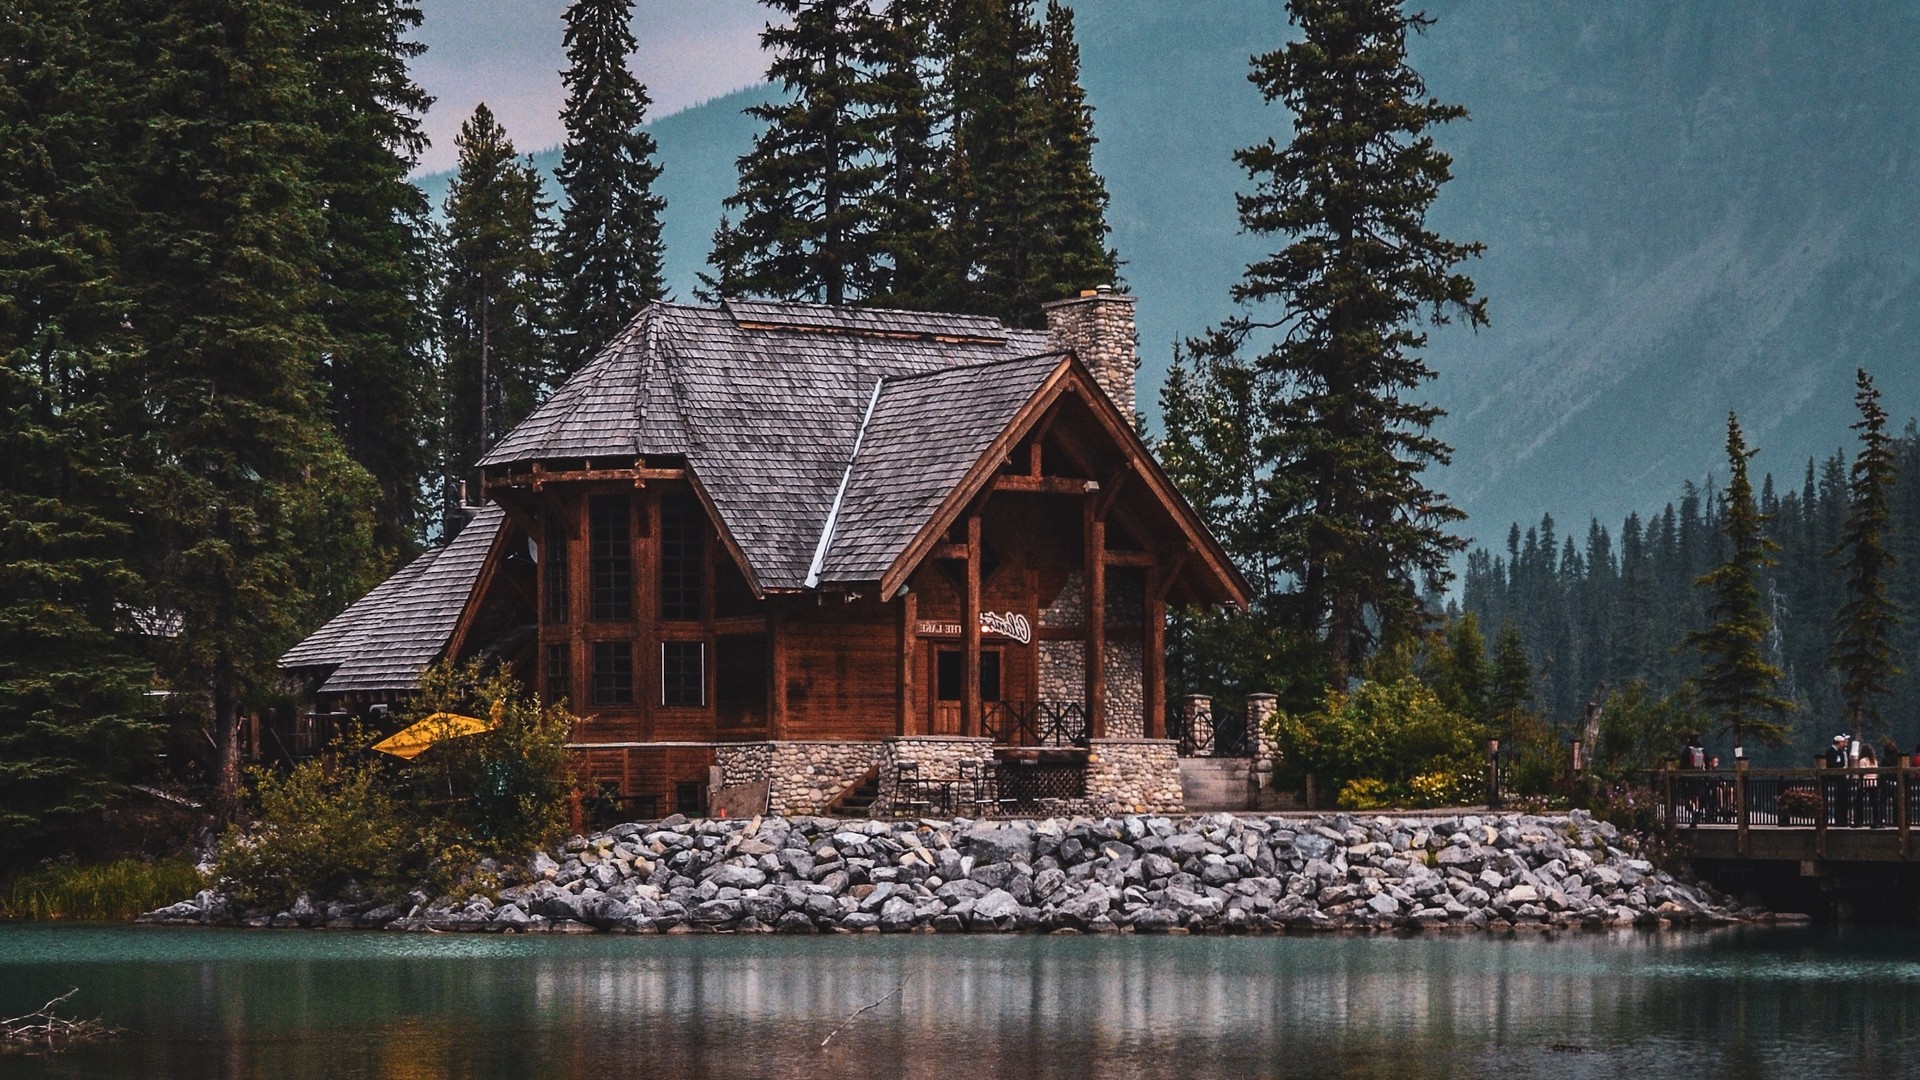 1920x1080 wallpapers: house, lake, harmony, silence, nature, forest (image)